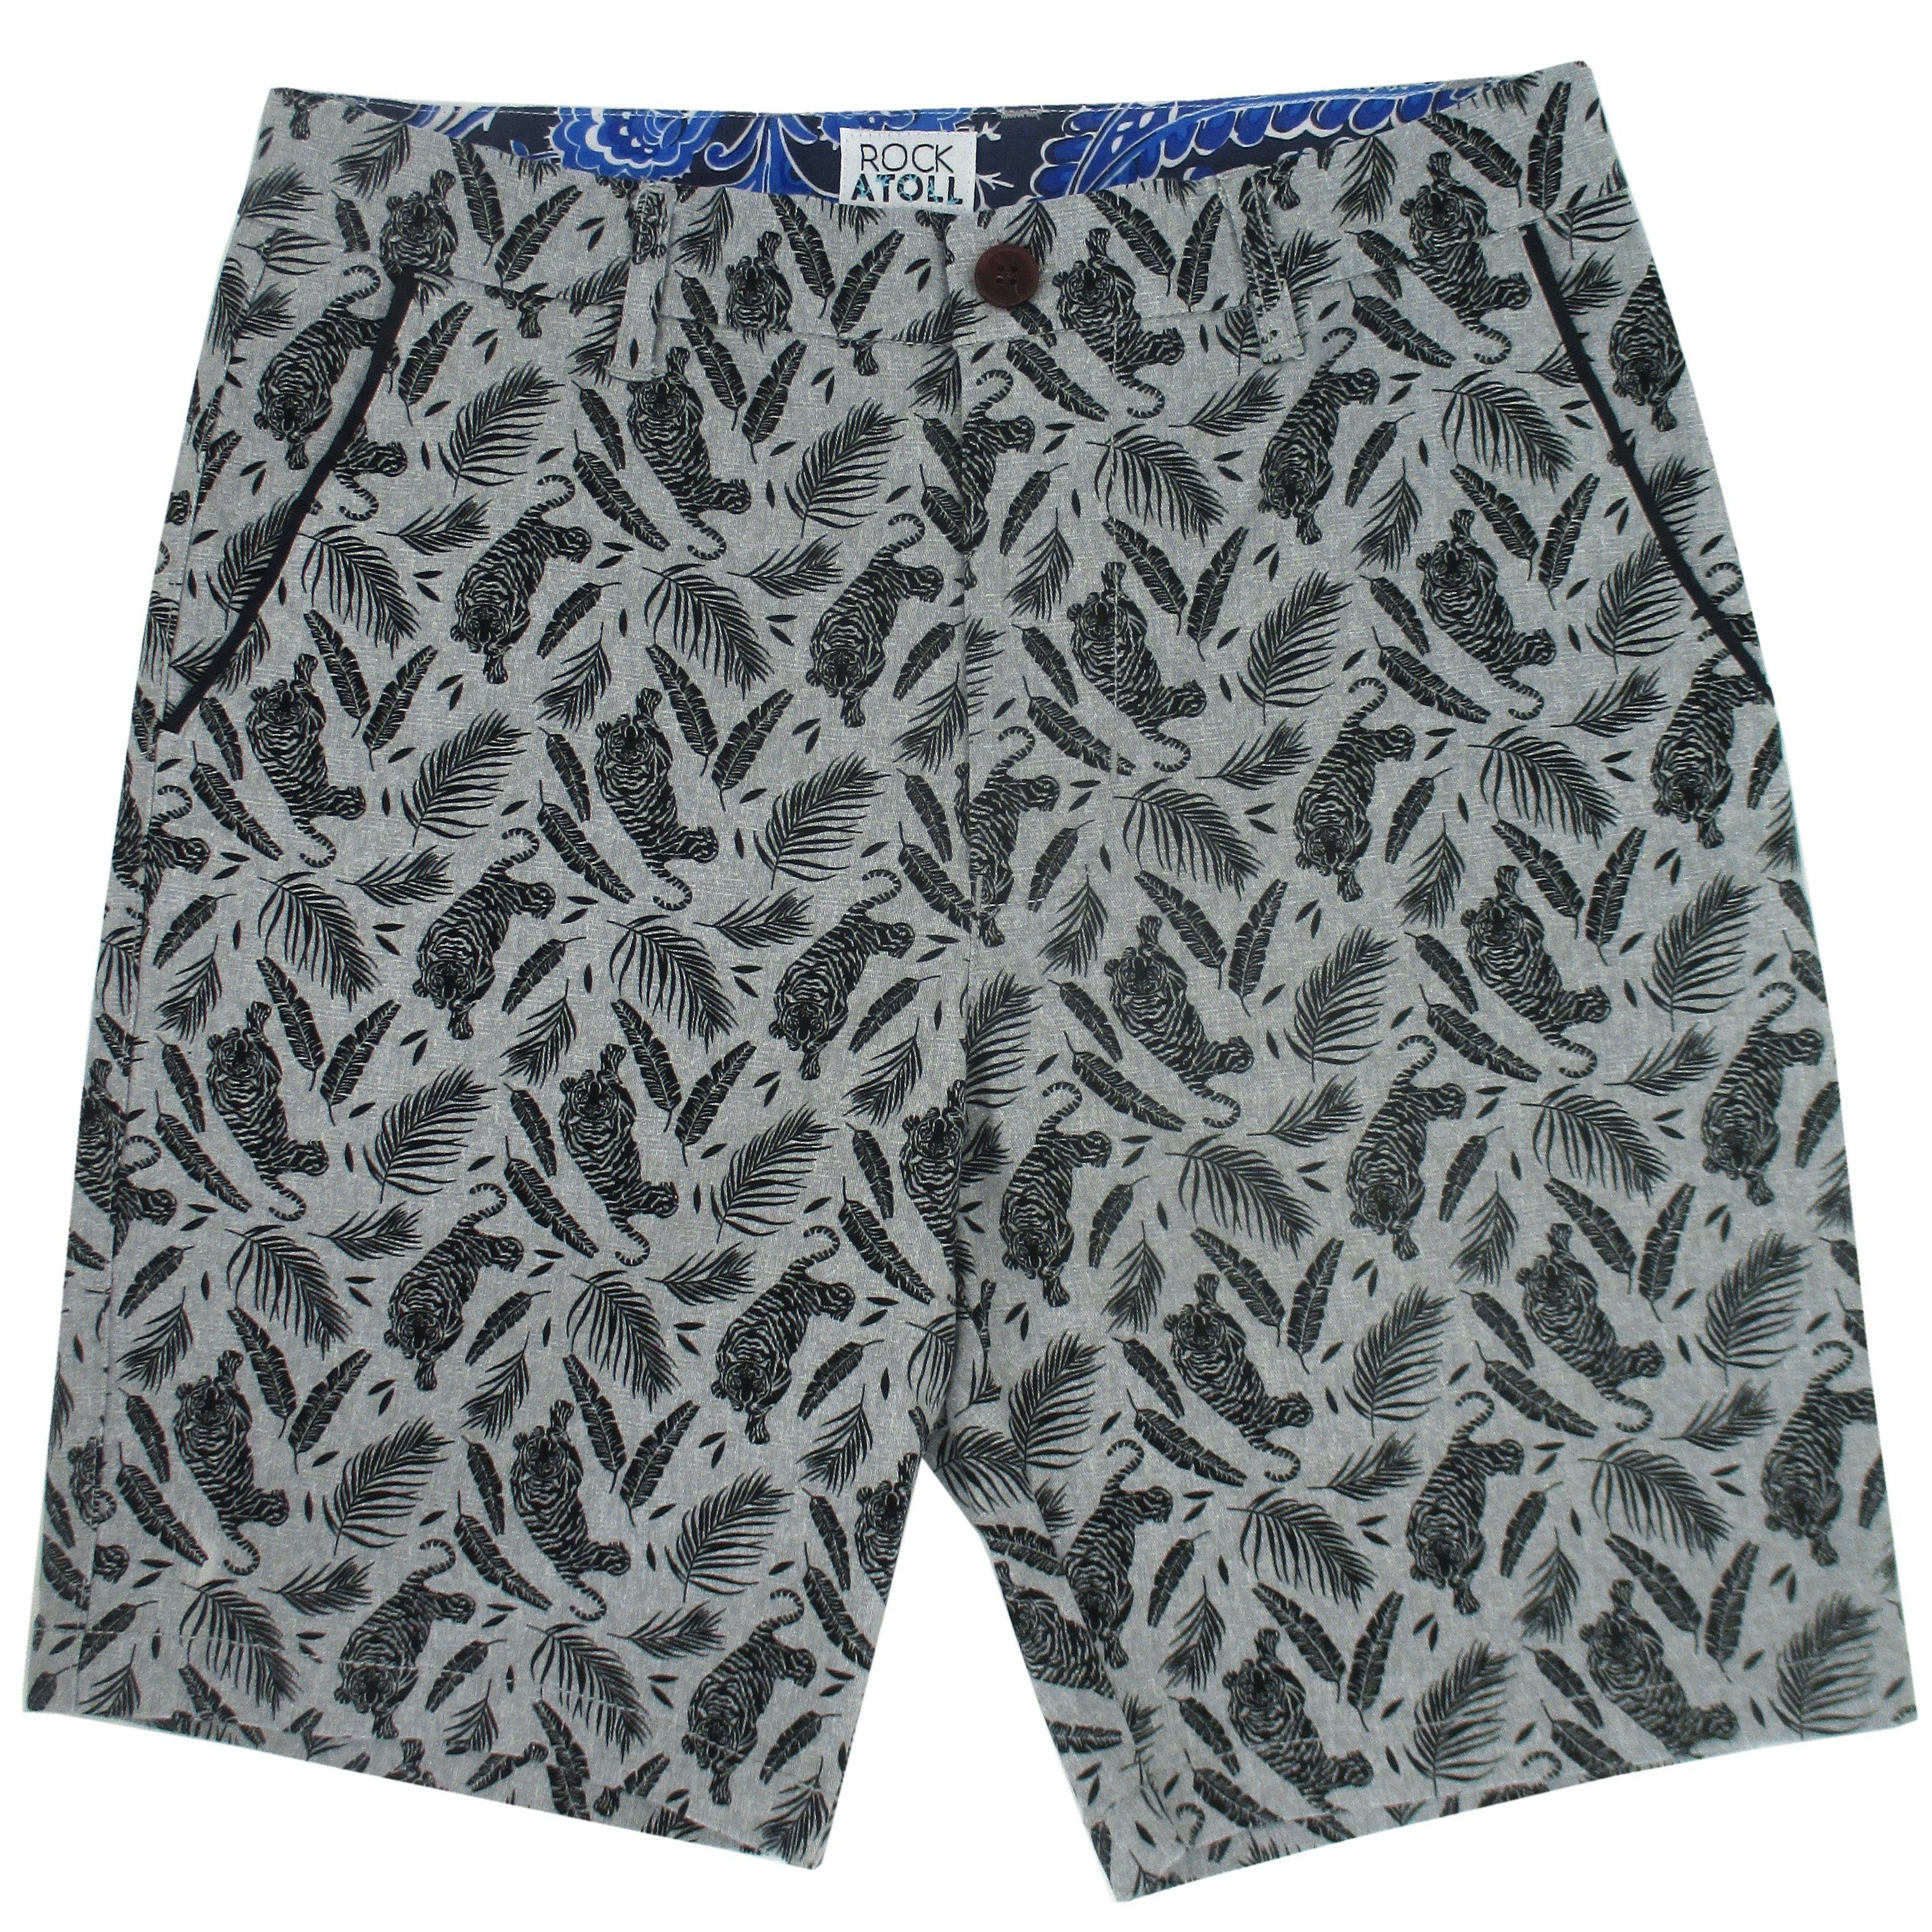 Rock Atoll Men's Flat Front Bermuda Golf Shorts with Black Grey Tiger All Over Pattern